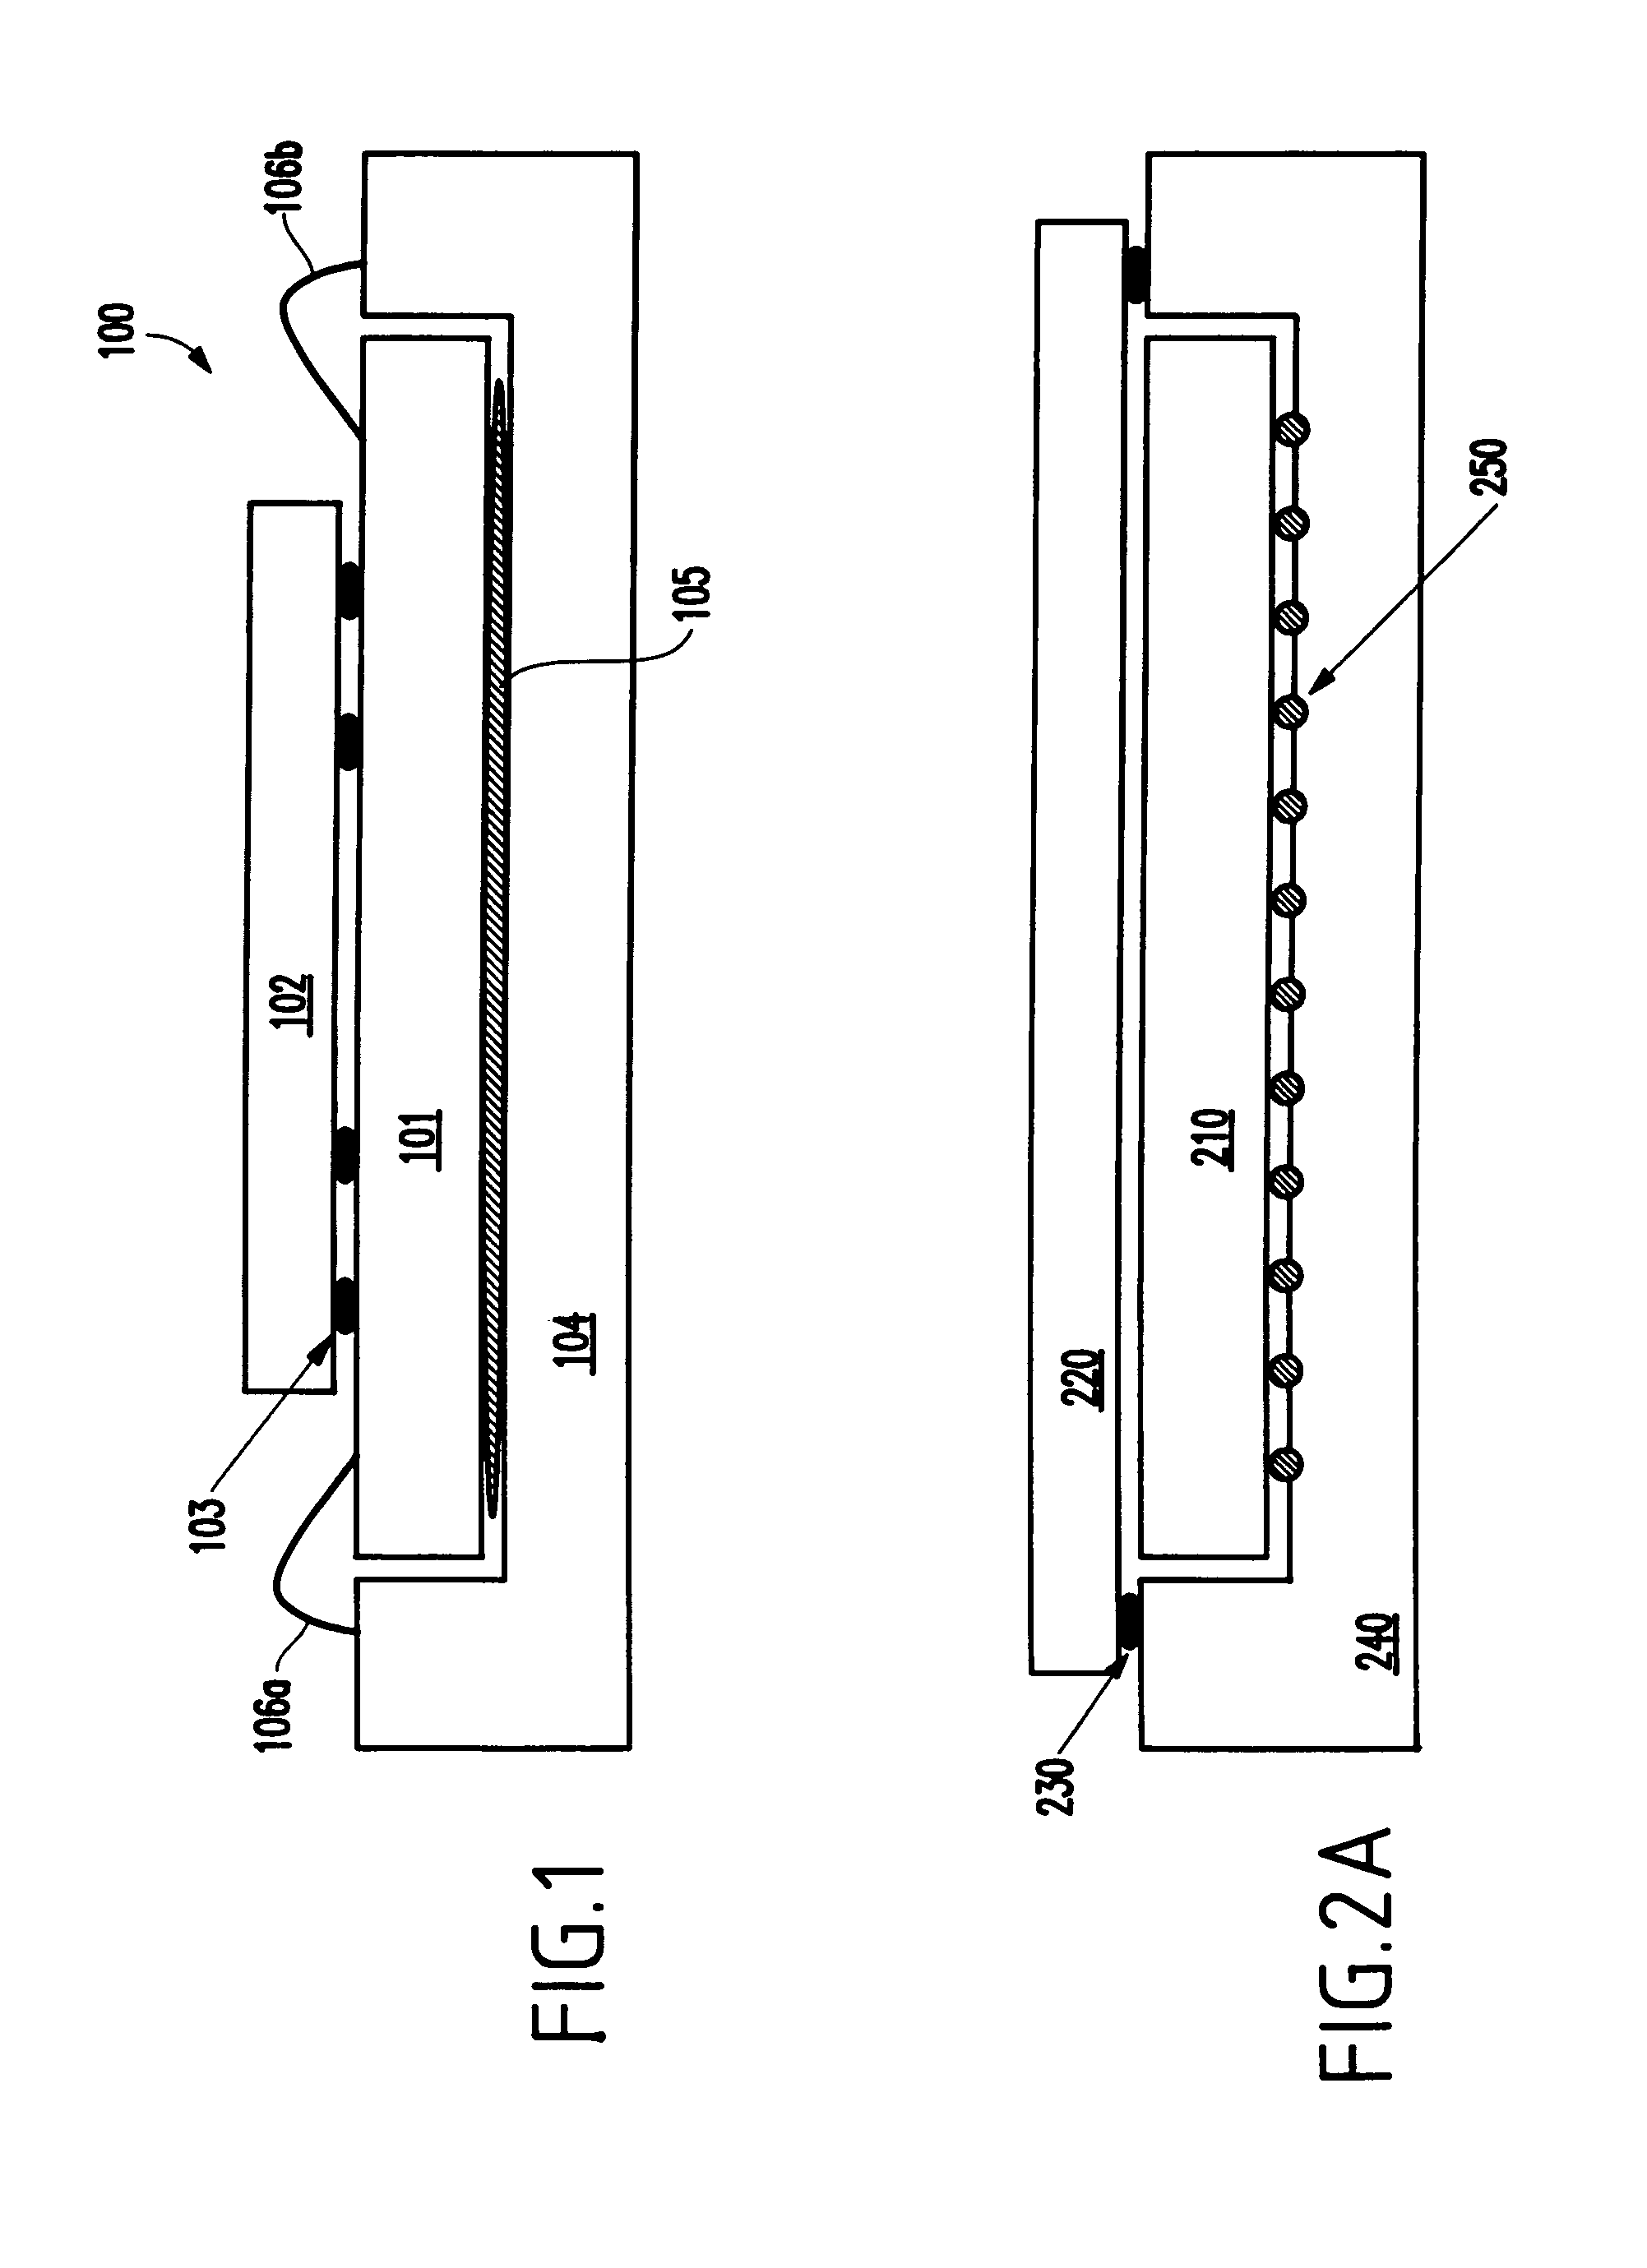 System level device for battery and integrated circuit integration